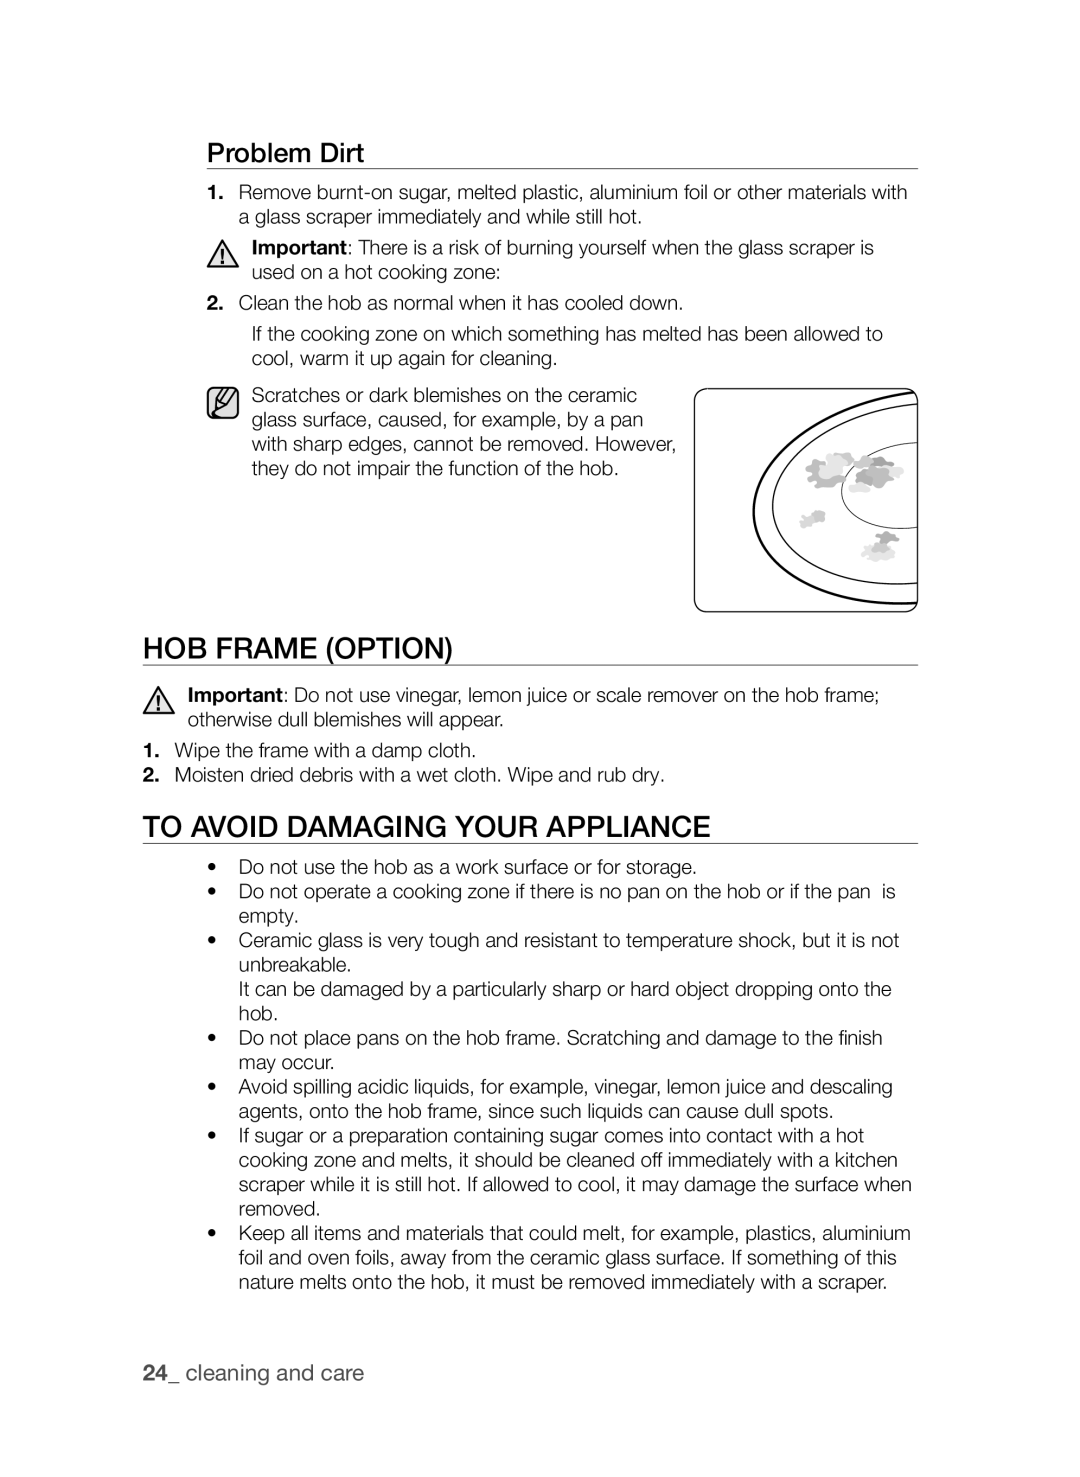 Samsung CTN364D001, CTI613EH user manual Hob Frame option, To avoid damaging your appliance, Problem Dirt, cleaning and care 